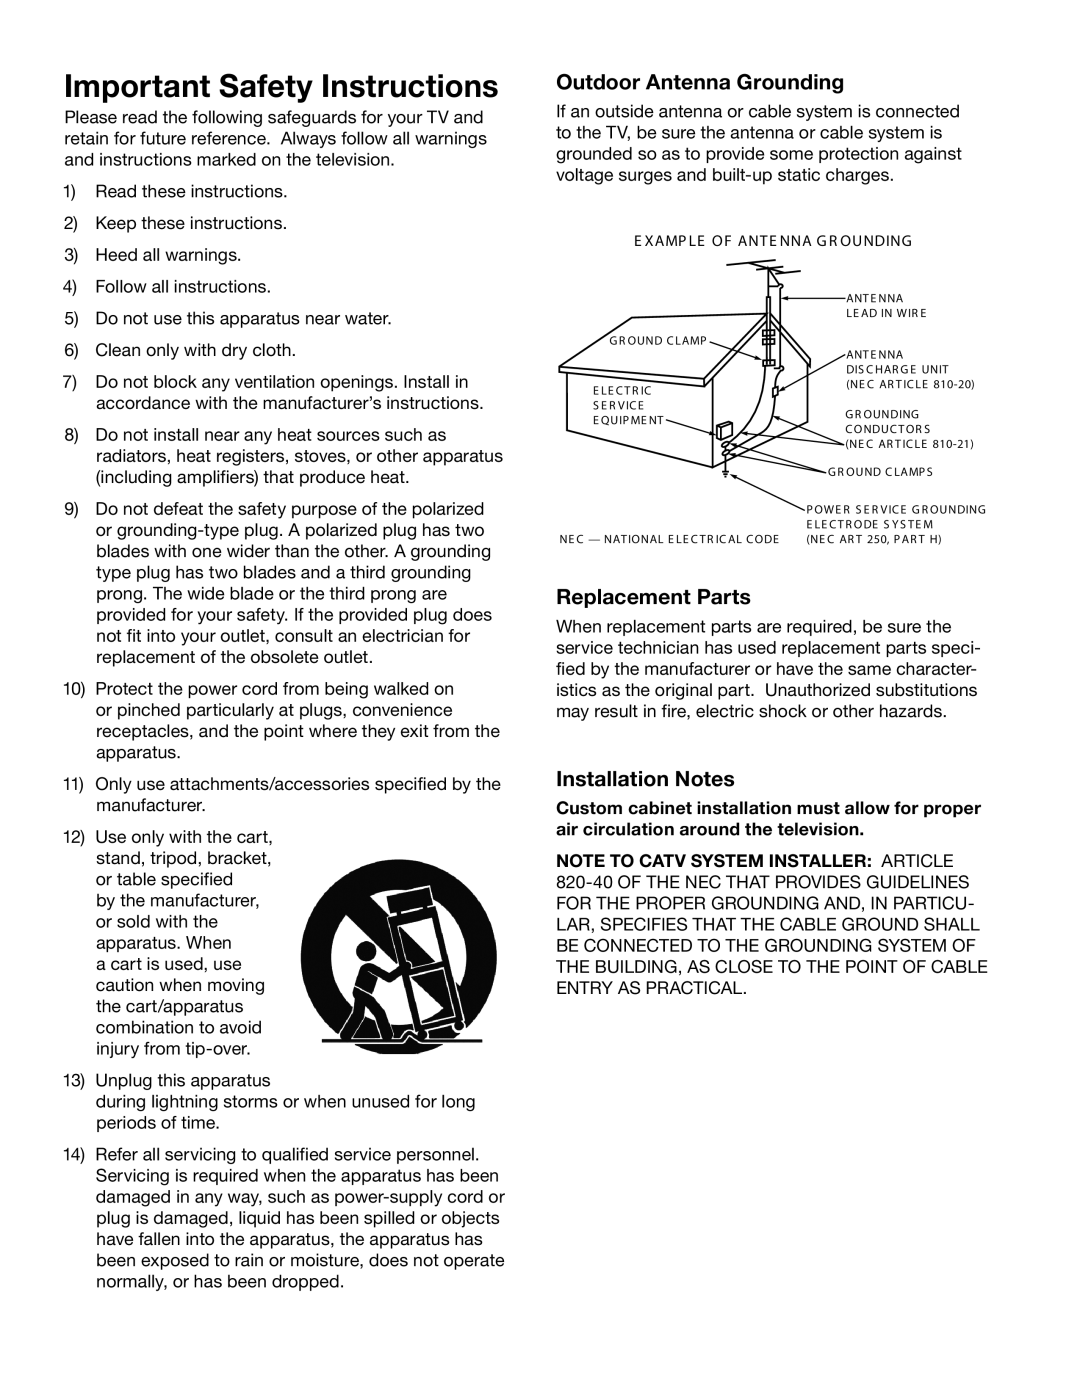 Mitsubishi Electronics WD-73837 manual Important Safety Instructions, Outdoor Antenna Grounding, Replacement Parts 